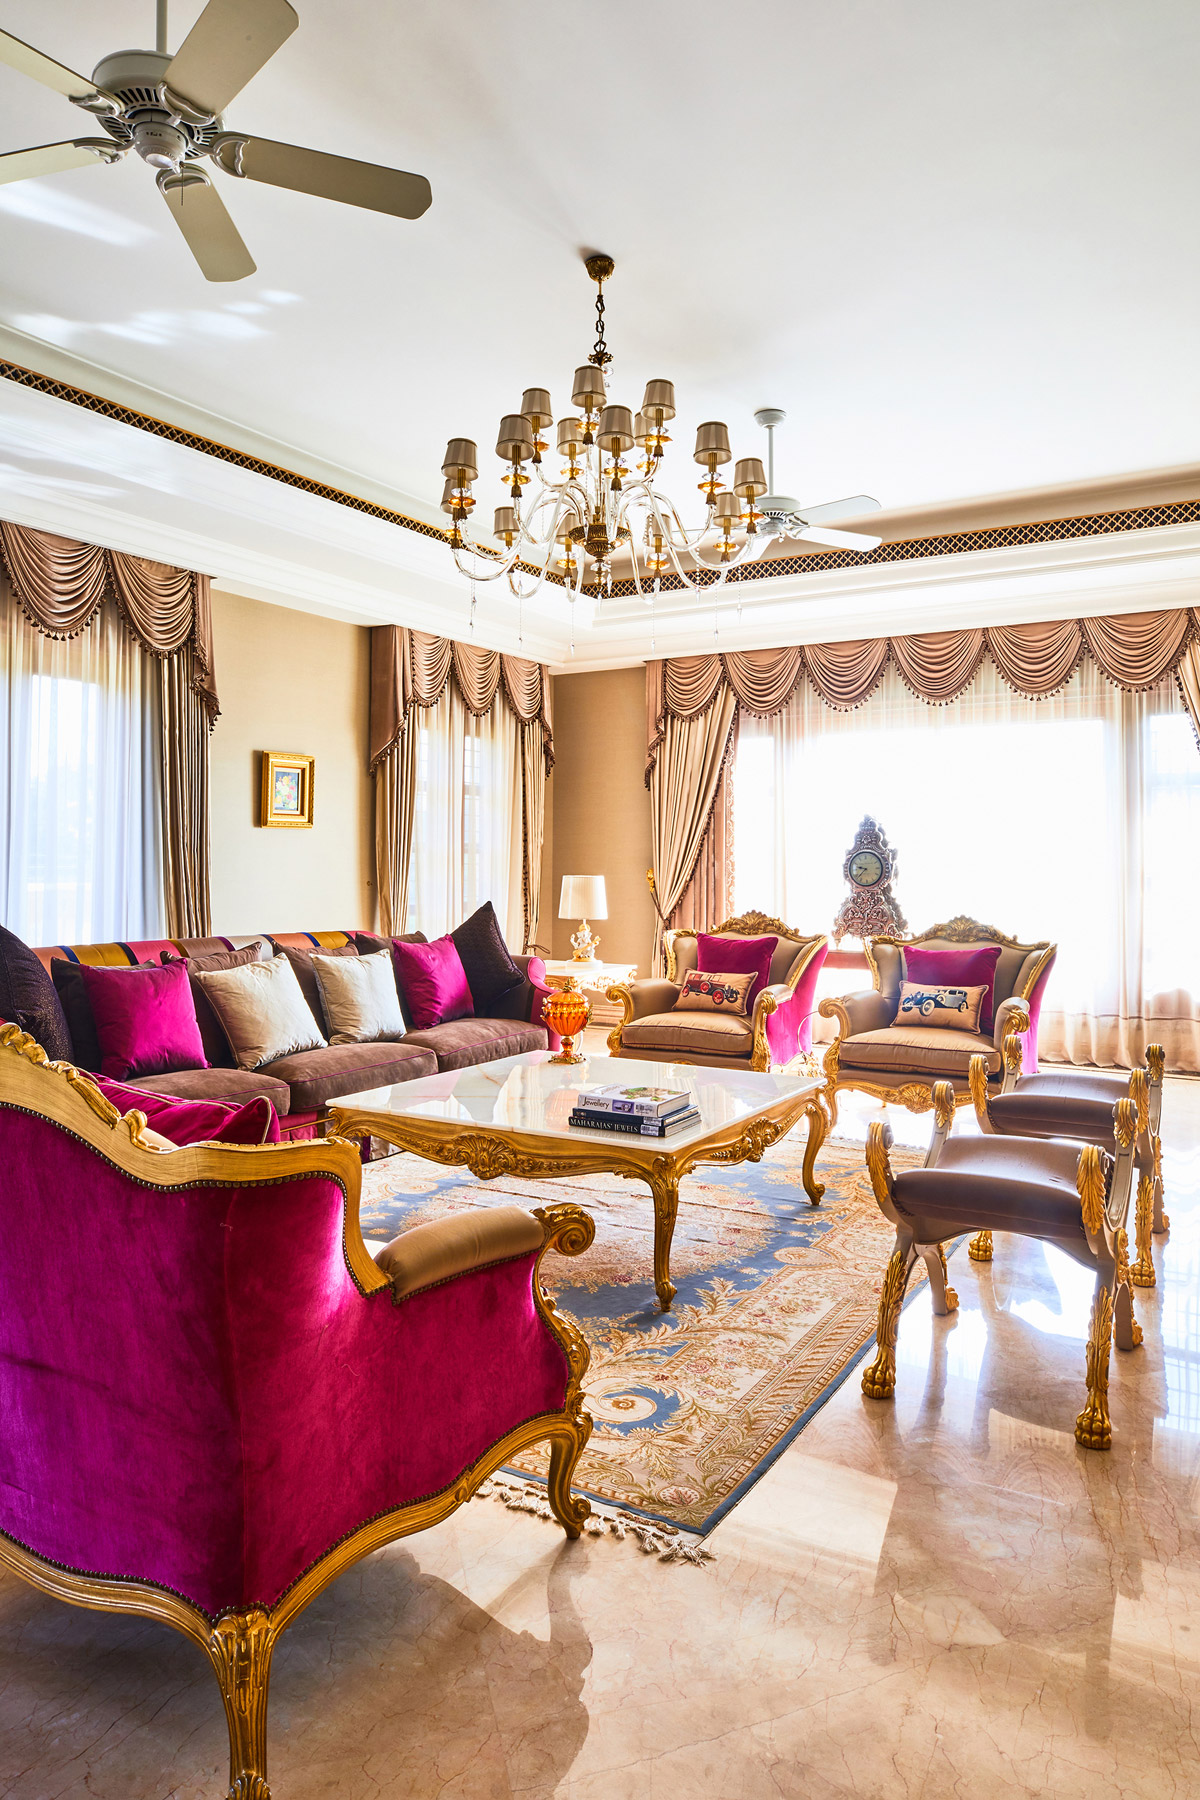 rococo style, Palatial Villa Embodies Rococo Style with Monarchical Opulence